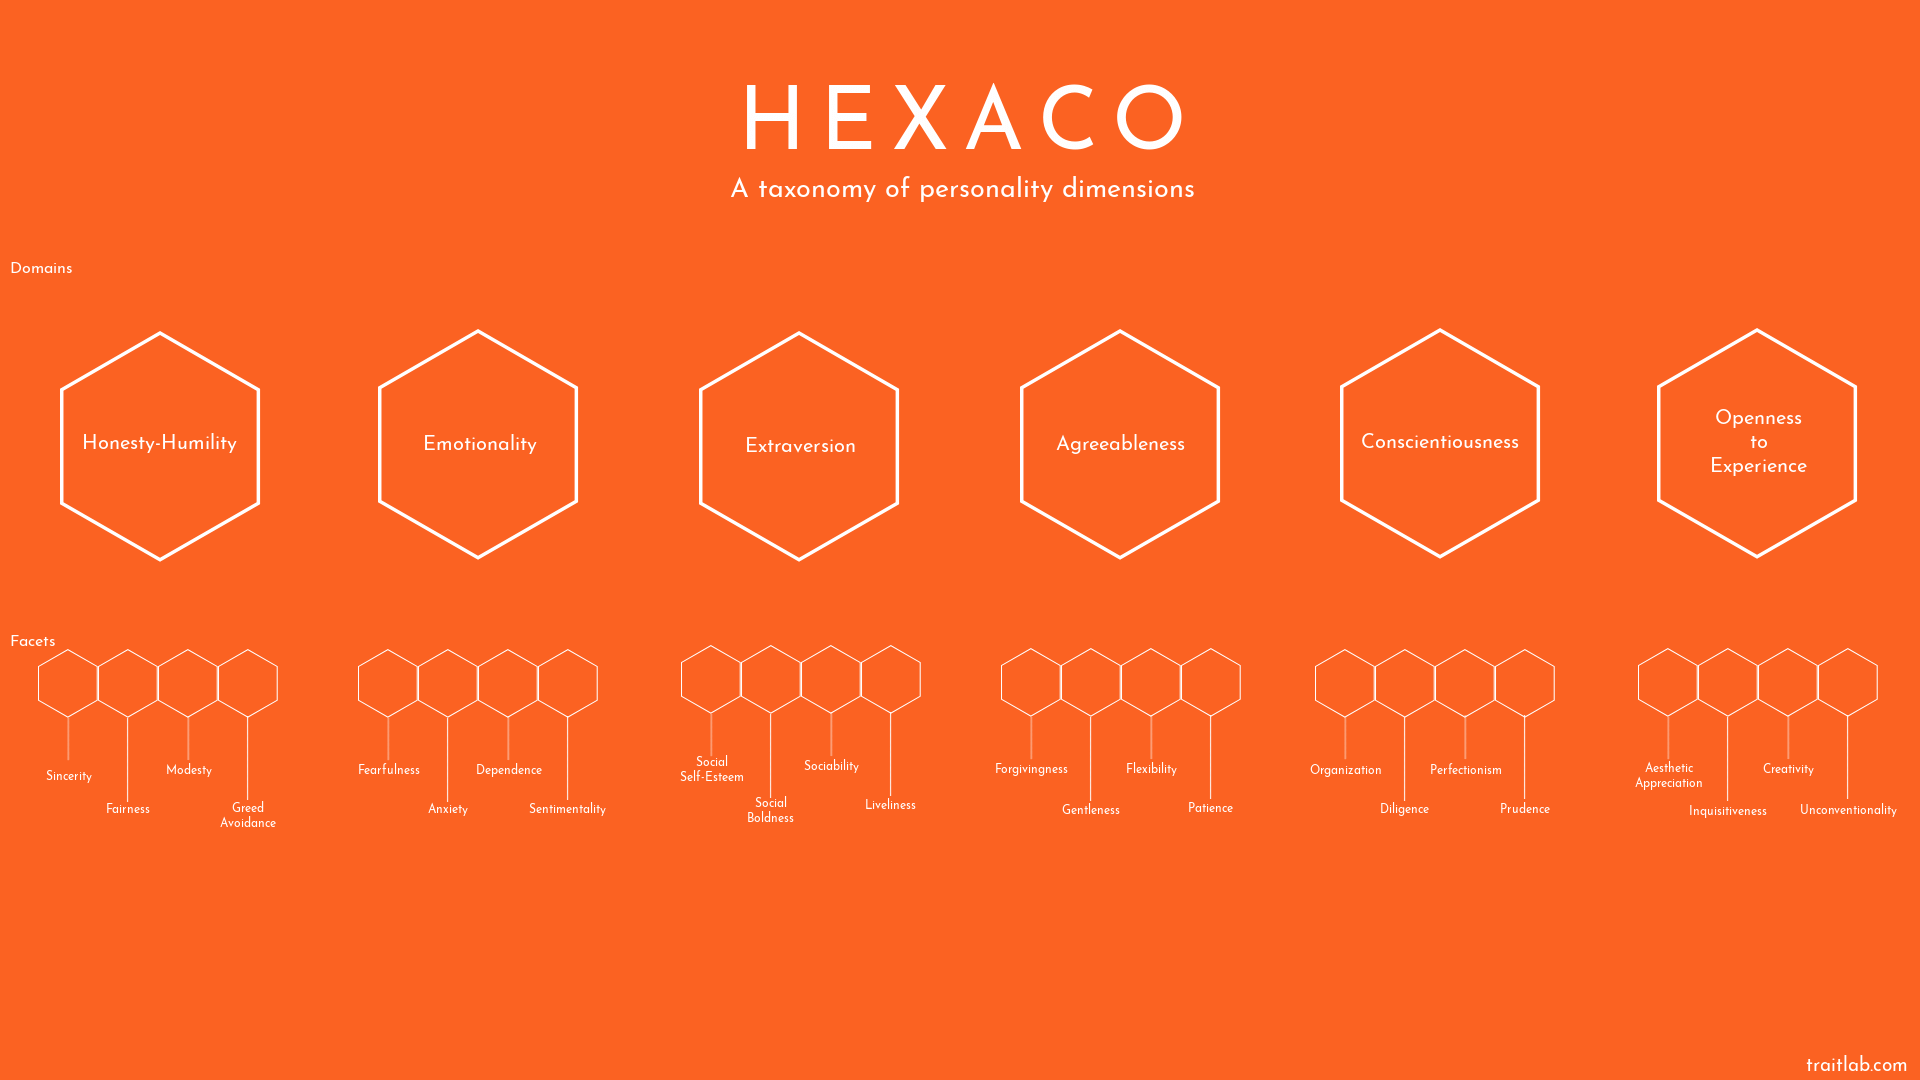 The HEXACO framework, including domains and facets